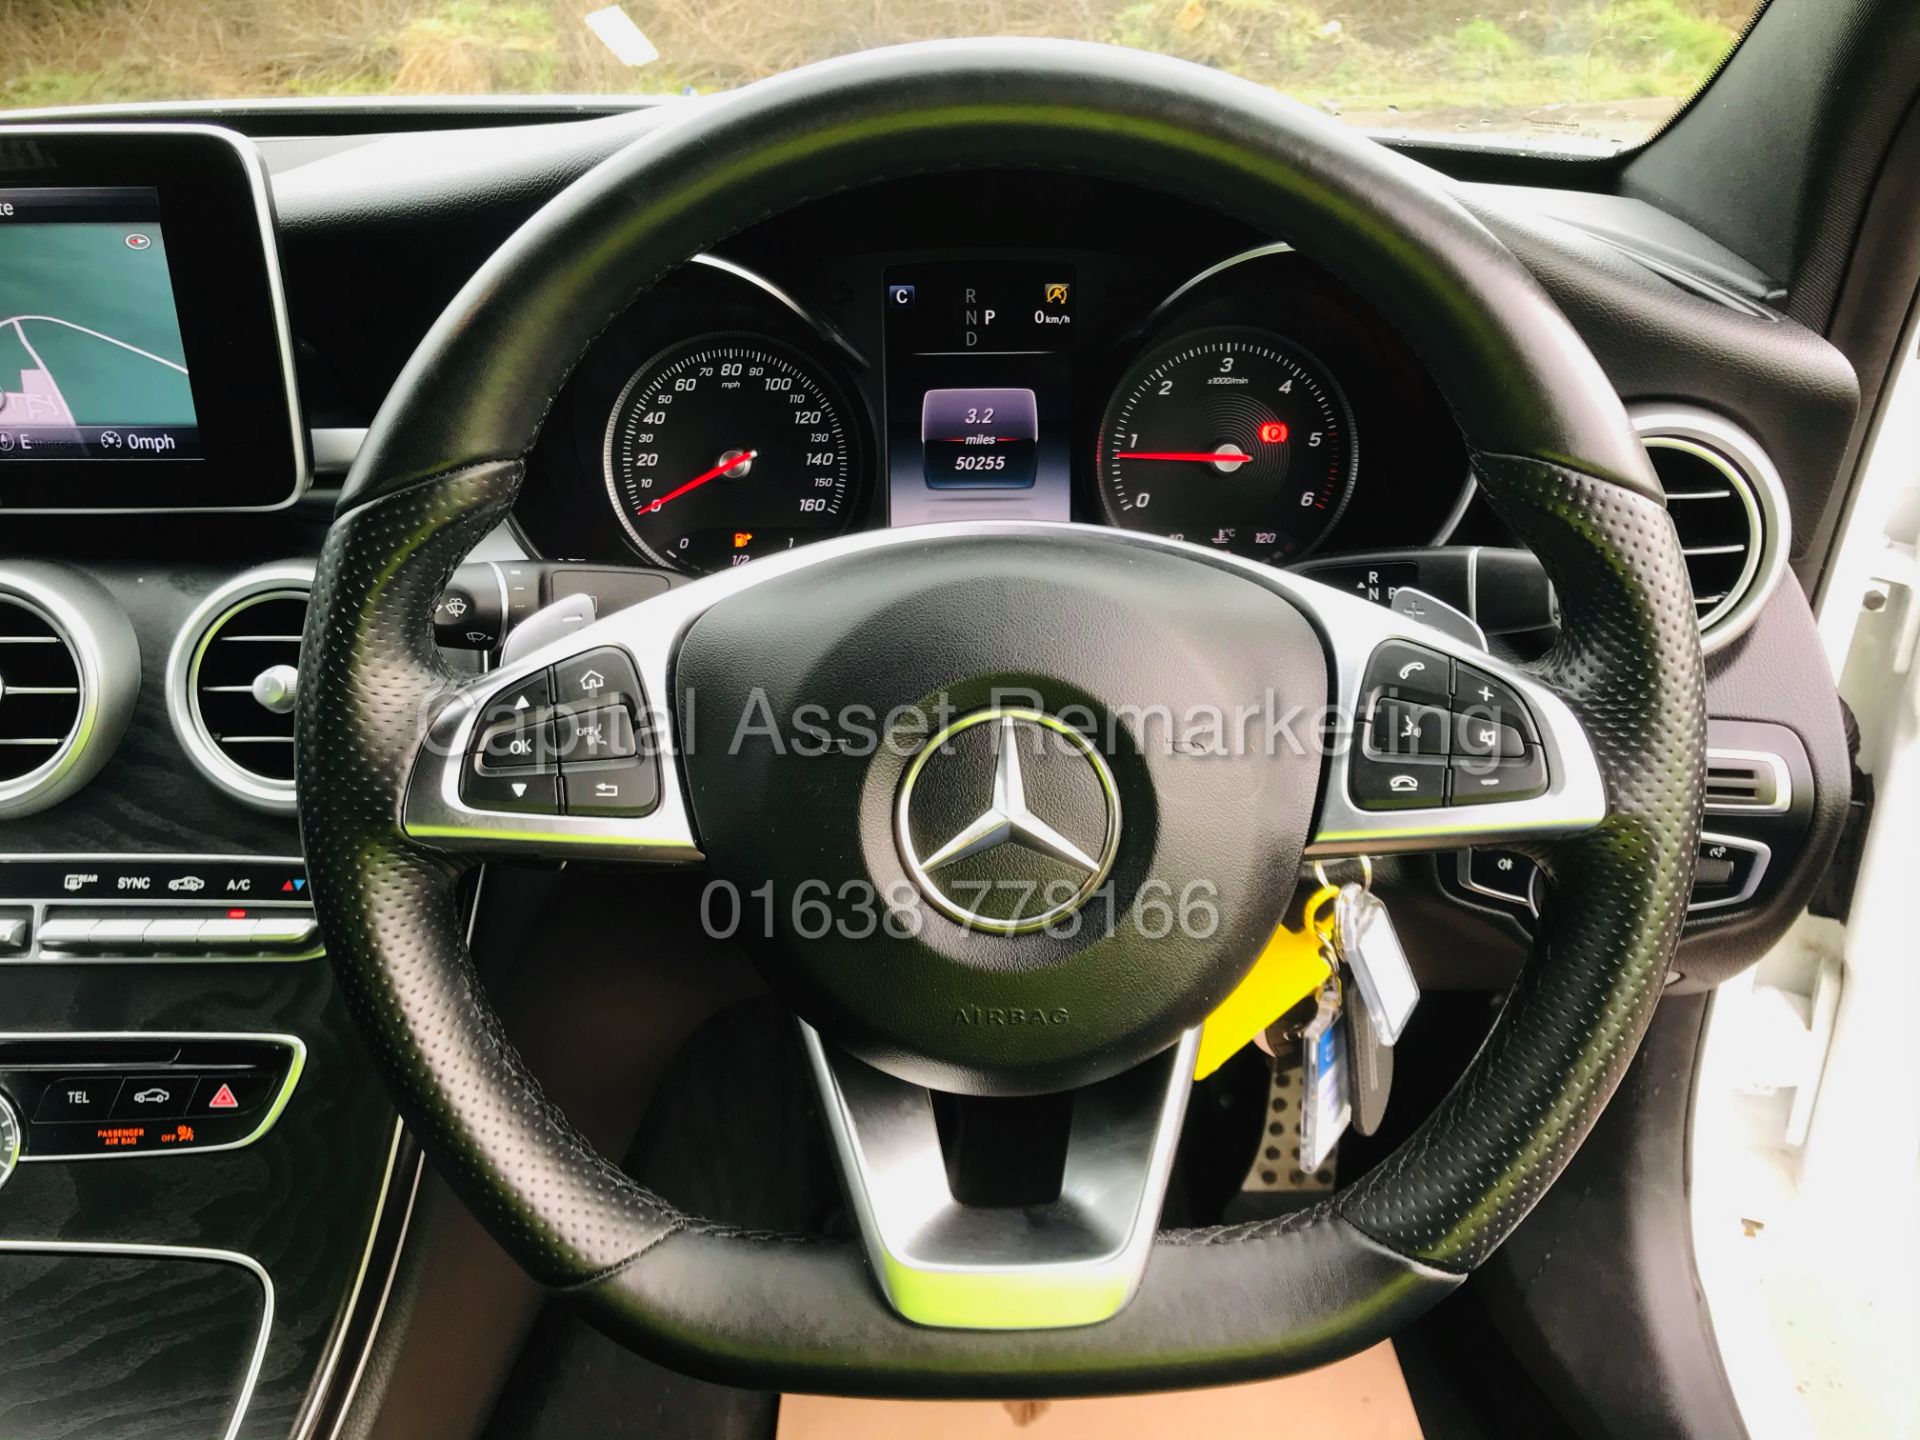 On Sale MERCEDES C220D "AMG-LINE" 9G TRONIC SALOON (18 REG) 1 OWNER WITH HISTORY - SAT NAV - - Image 17 of 36